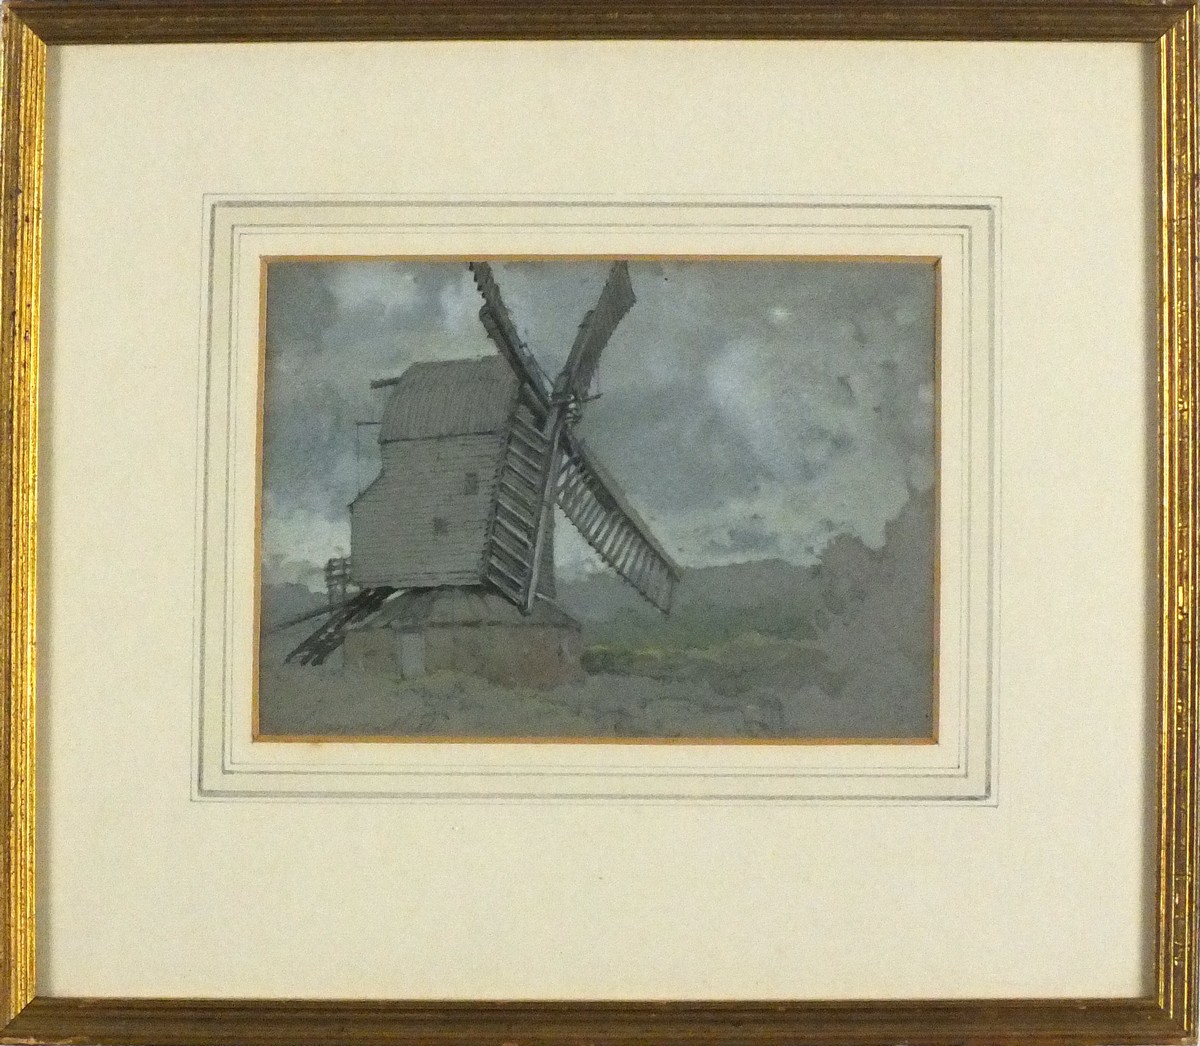 Thomas Edward FRANCIS (British 1873-1961) Chinnor Mill, Watercolour and pencil, Titled lower left, - Image 2 of 2